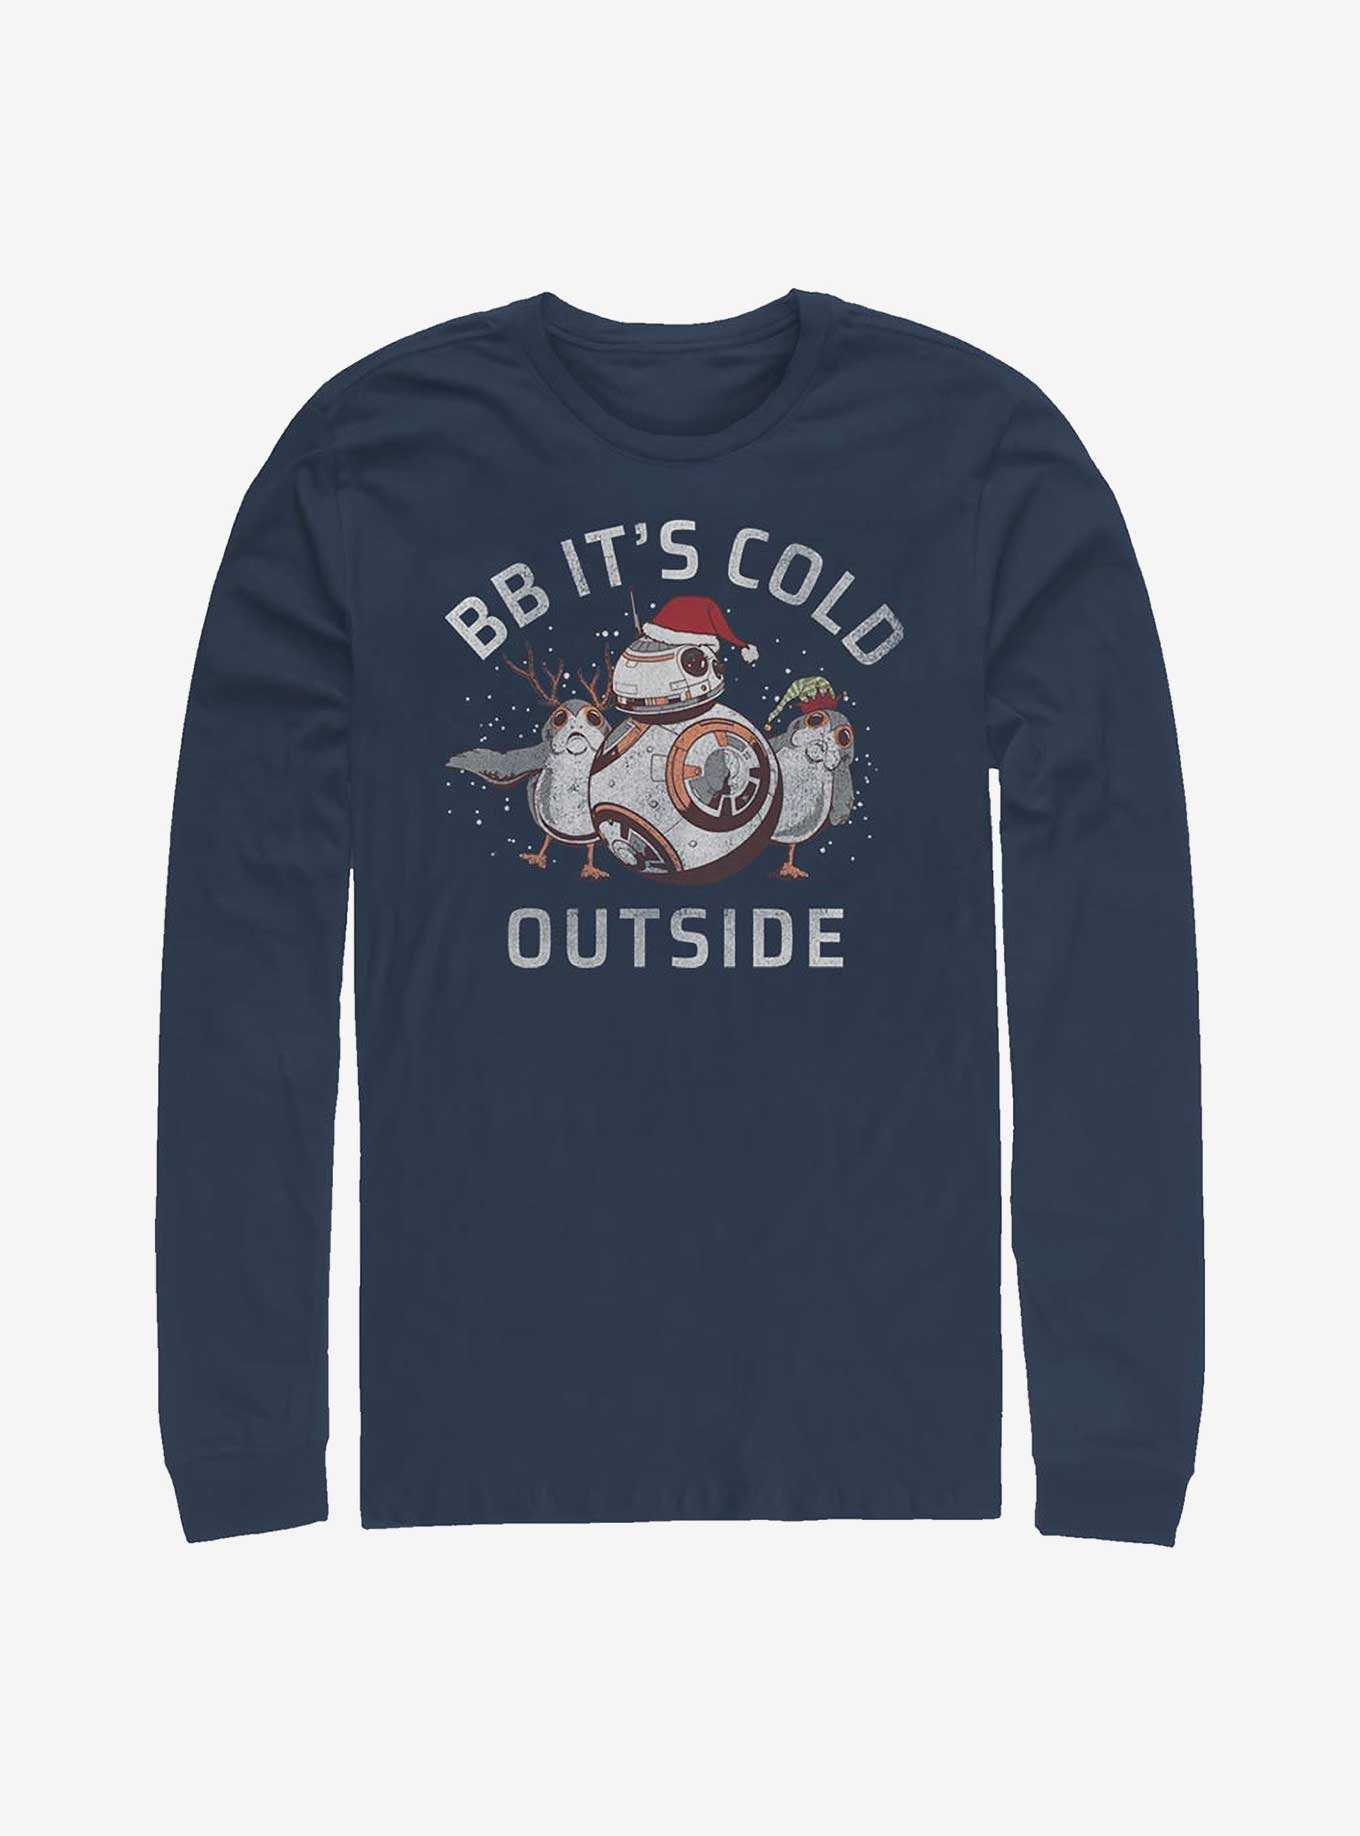 Star Wars BB It's Cold Outside Long-Sleeve T-Shirt, , hi-res